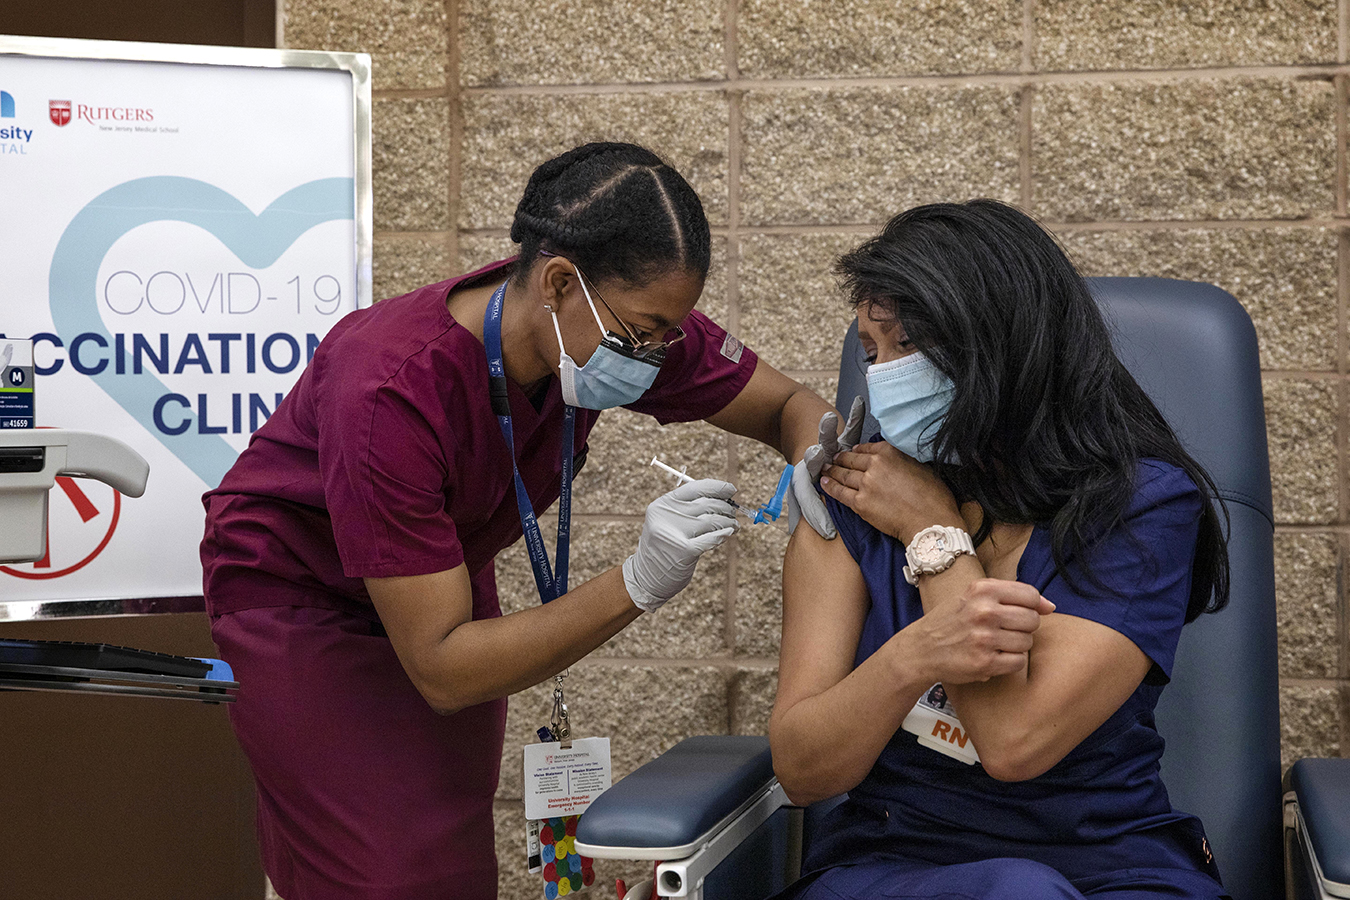 Covid ‘Decimated Our Staff’ as the Pandemic Ravages Health Workers of Color